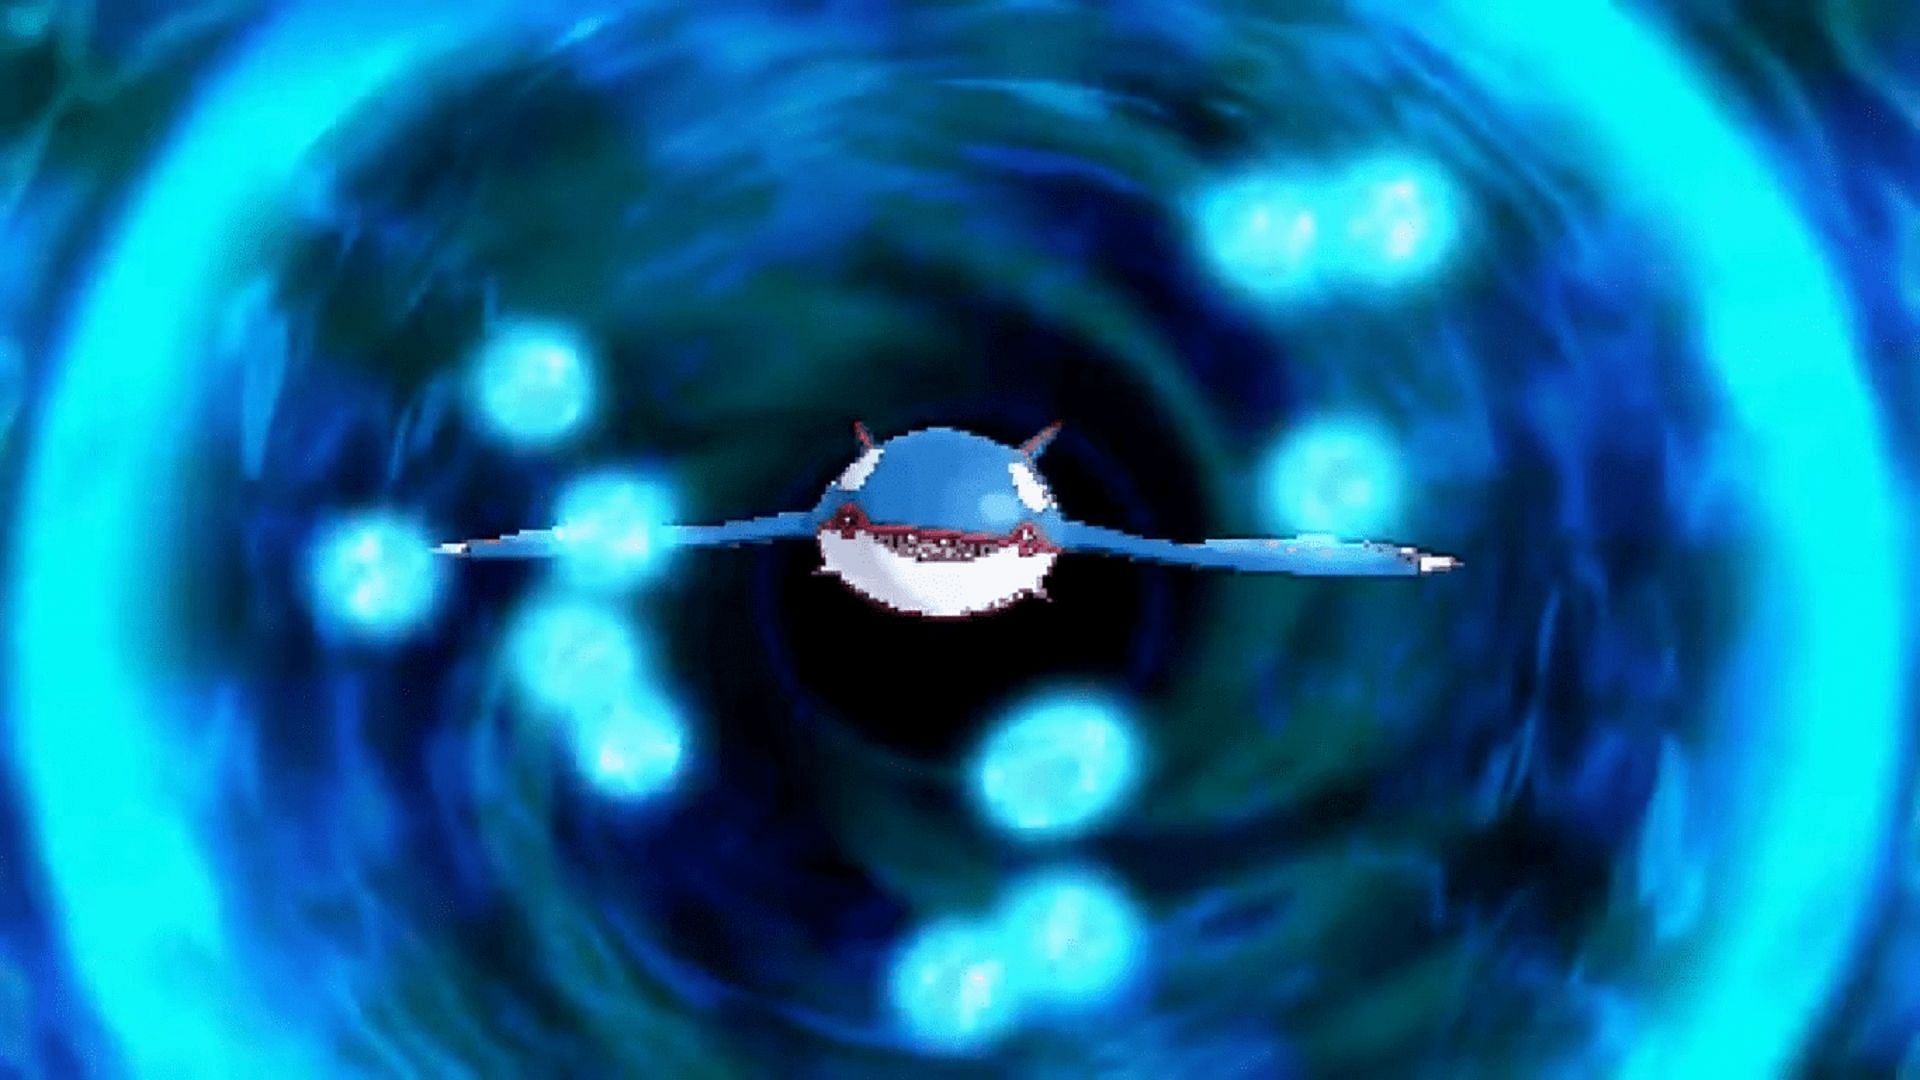 Kyogre attacks with Origin Pulse in Omega Ruby/Alpha Sapphire (Image via Game Freak)